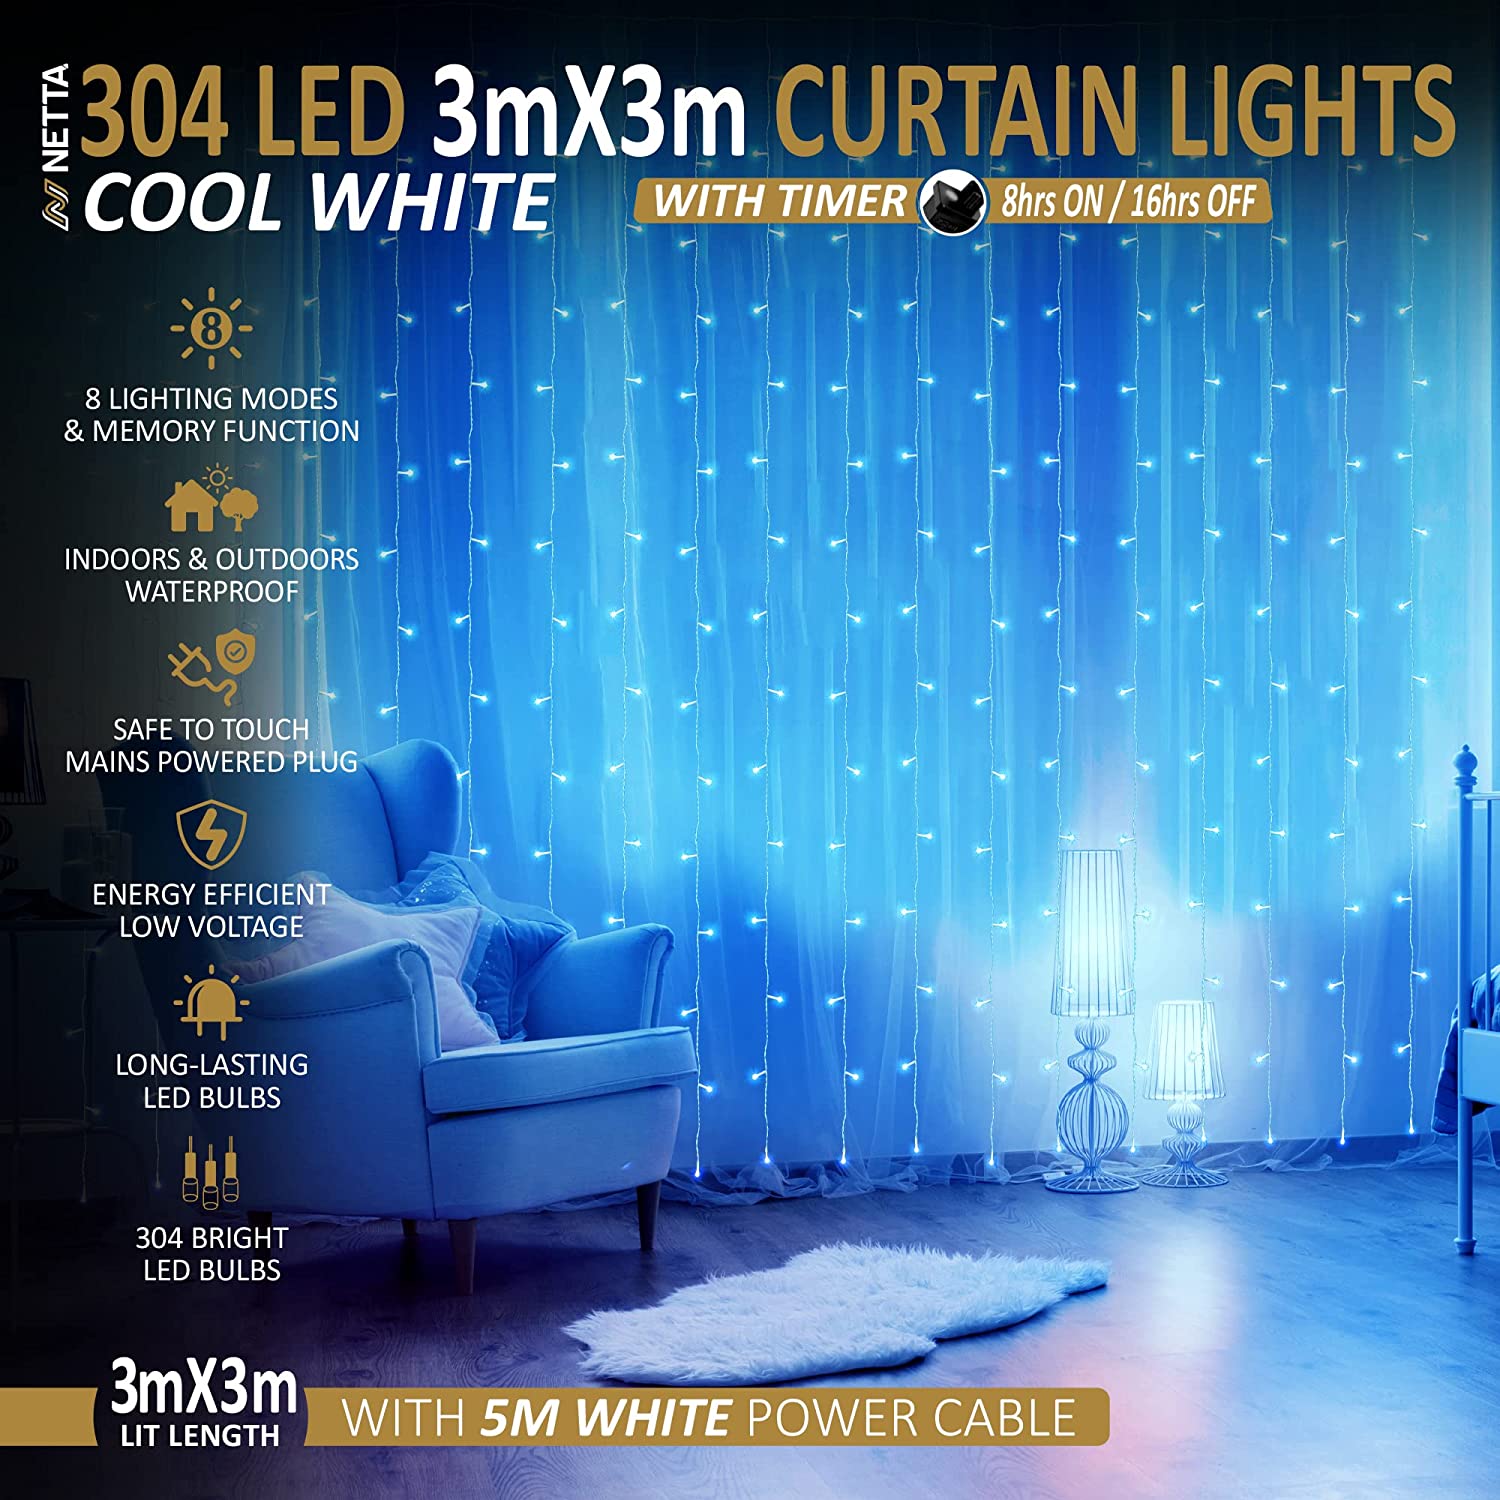 NETTA Curtain Fairy Lights - 3M x 3M, Waterproof LED with Timer, 8 Modes - Cool White